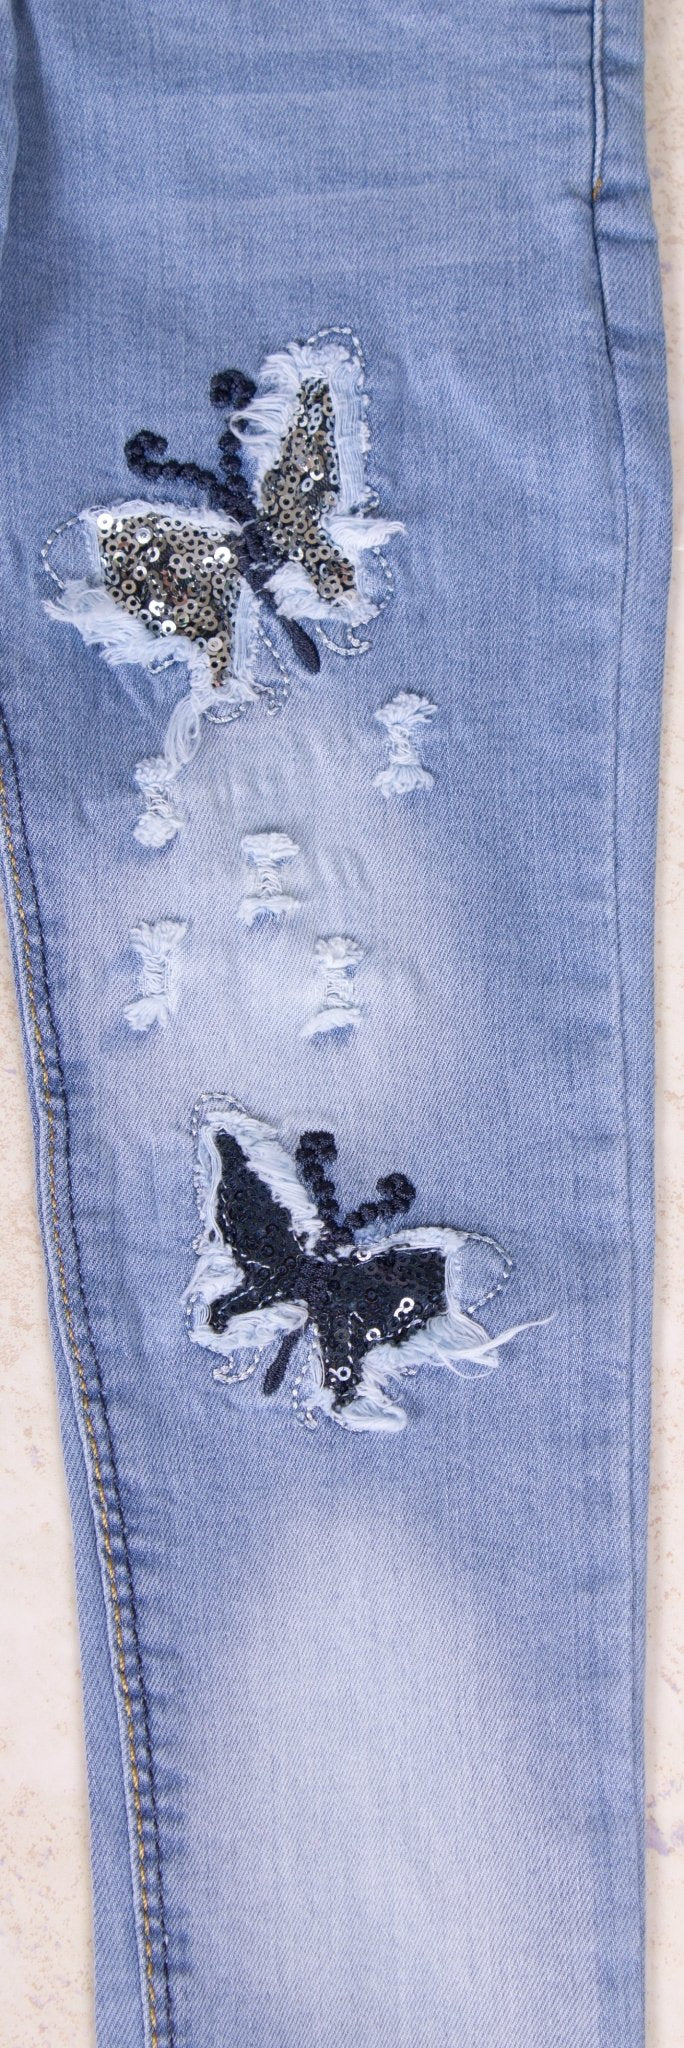 Girls' Butterfly Jeans Black - Elma's Clothing